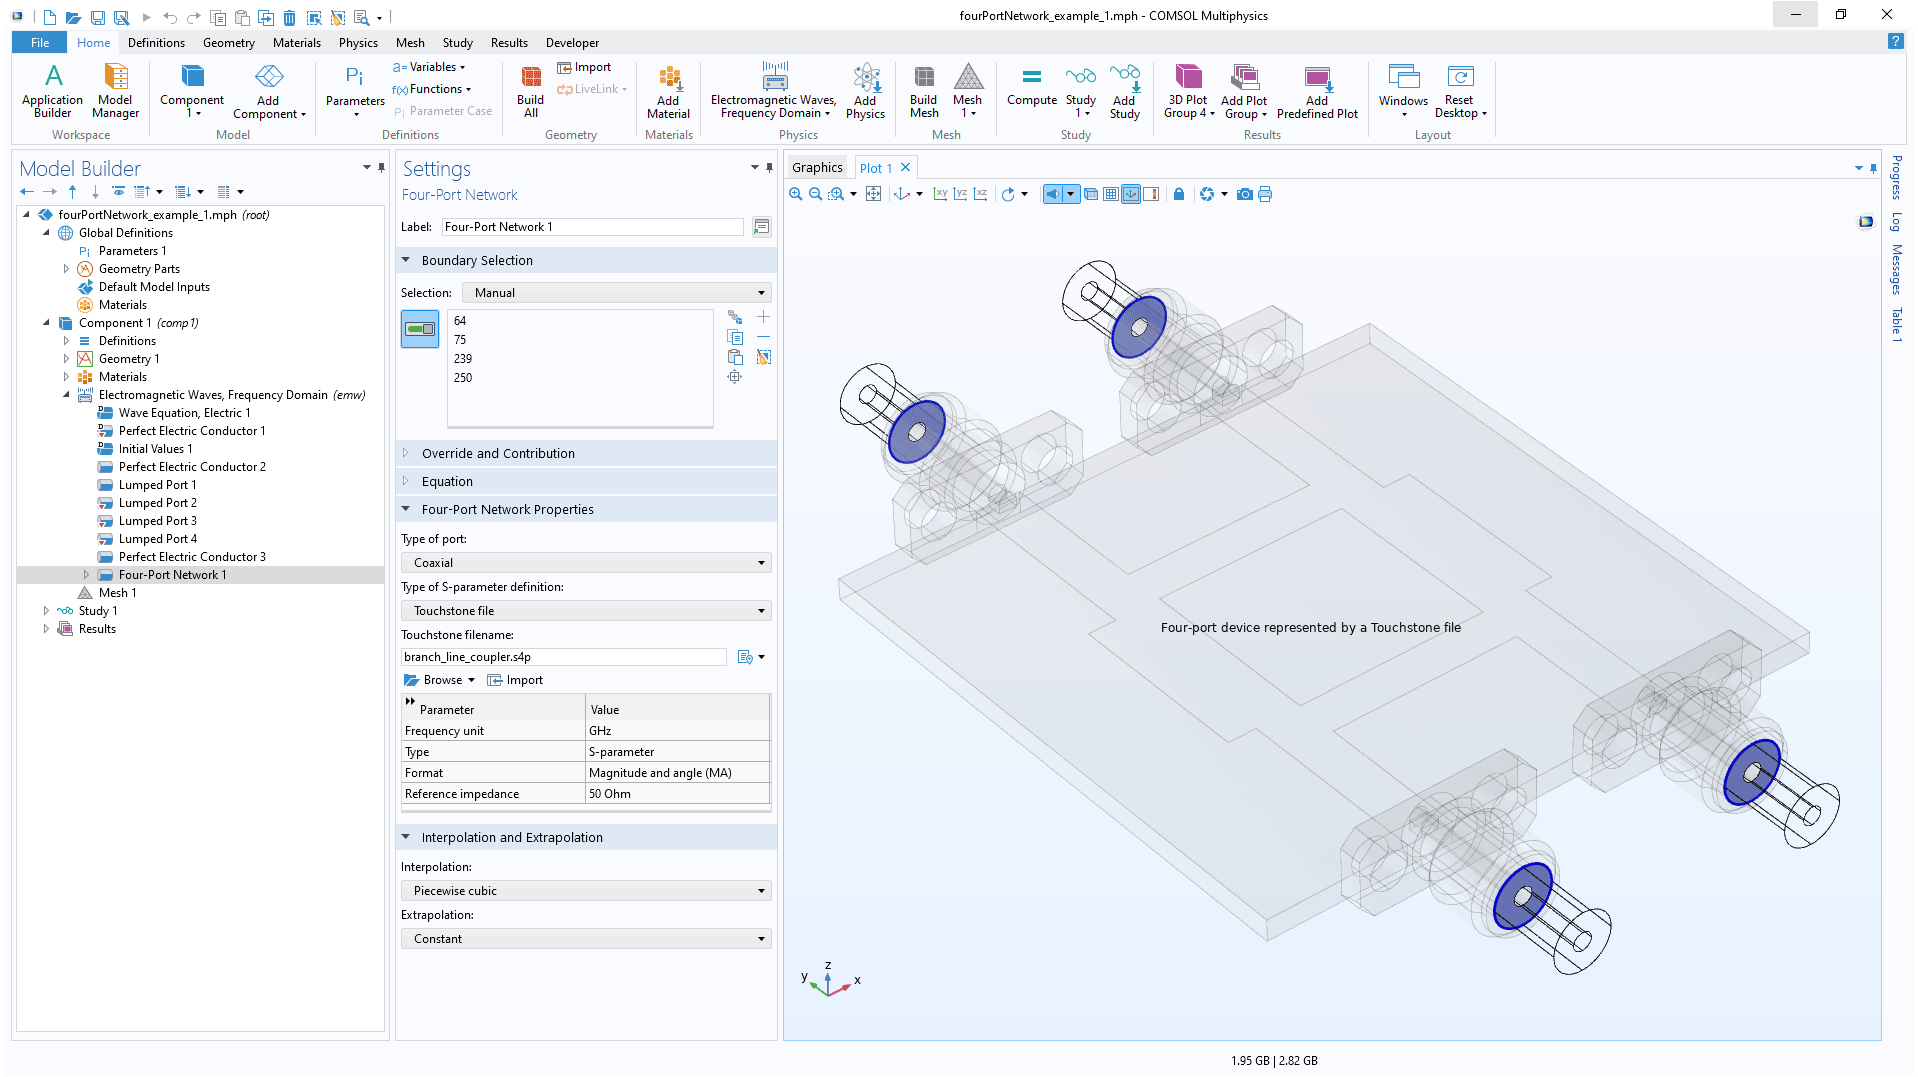 The COMSOL Multiphysics UI showing the Model Builder with the Four-Port Network boundary condition selected, the corresponding Settings window, and the Graphics window showing a four-port device.